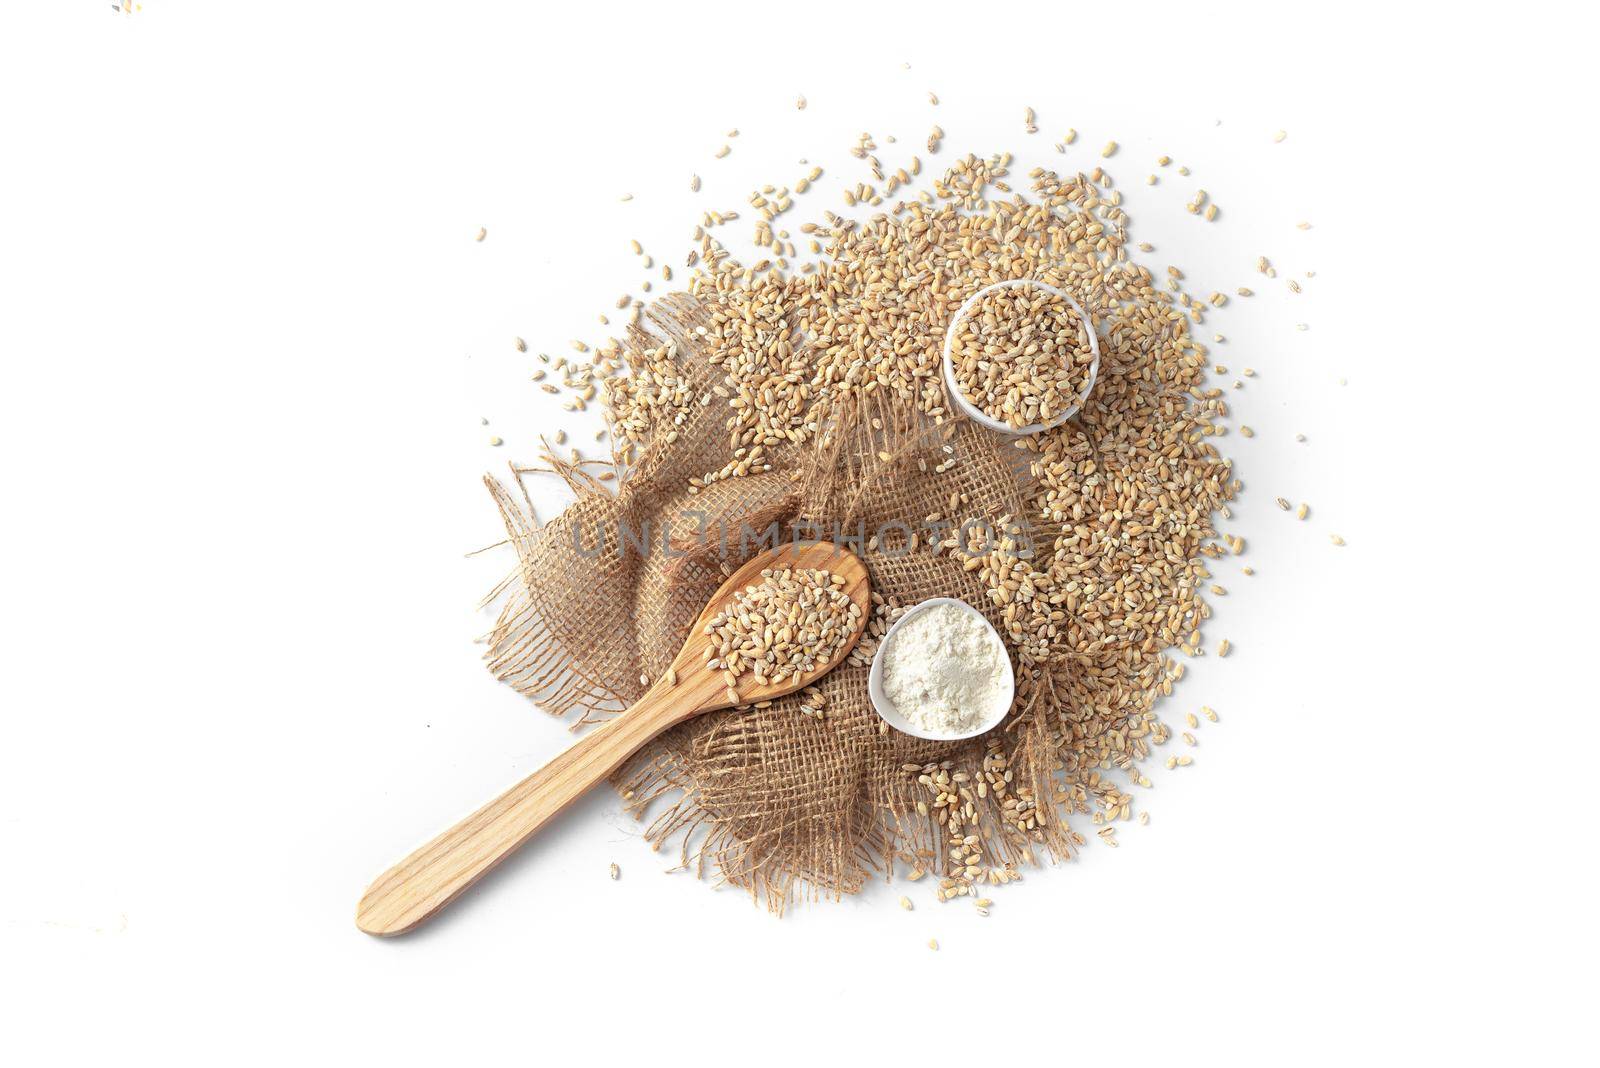 Whole wheat and barley seeds on white background with wooden spoon isolate. Top view.